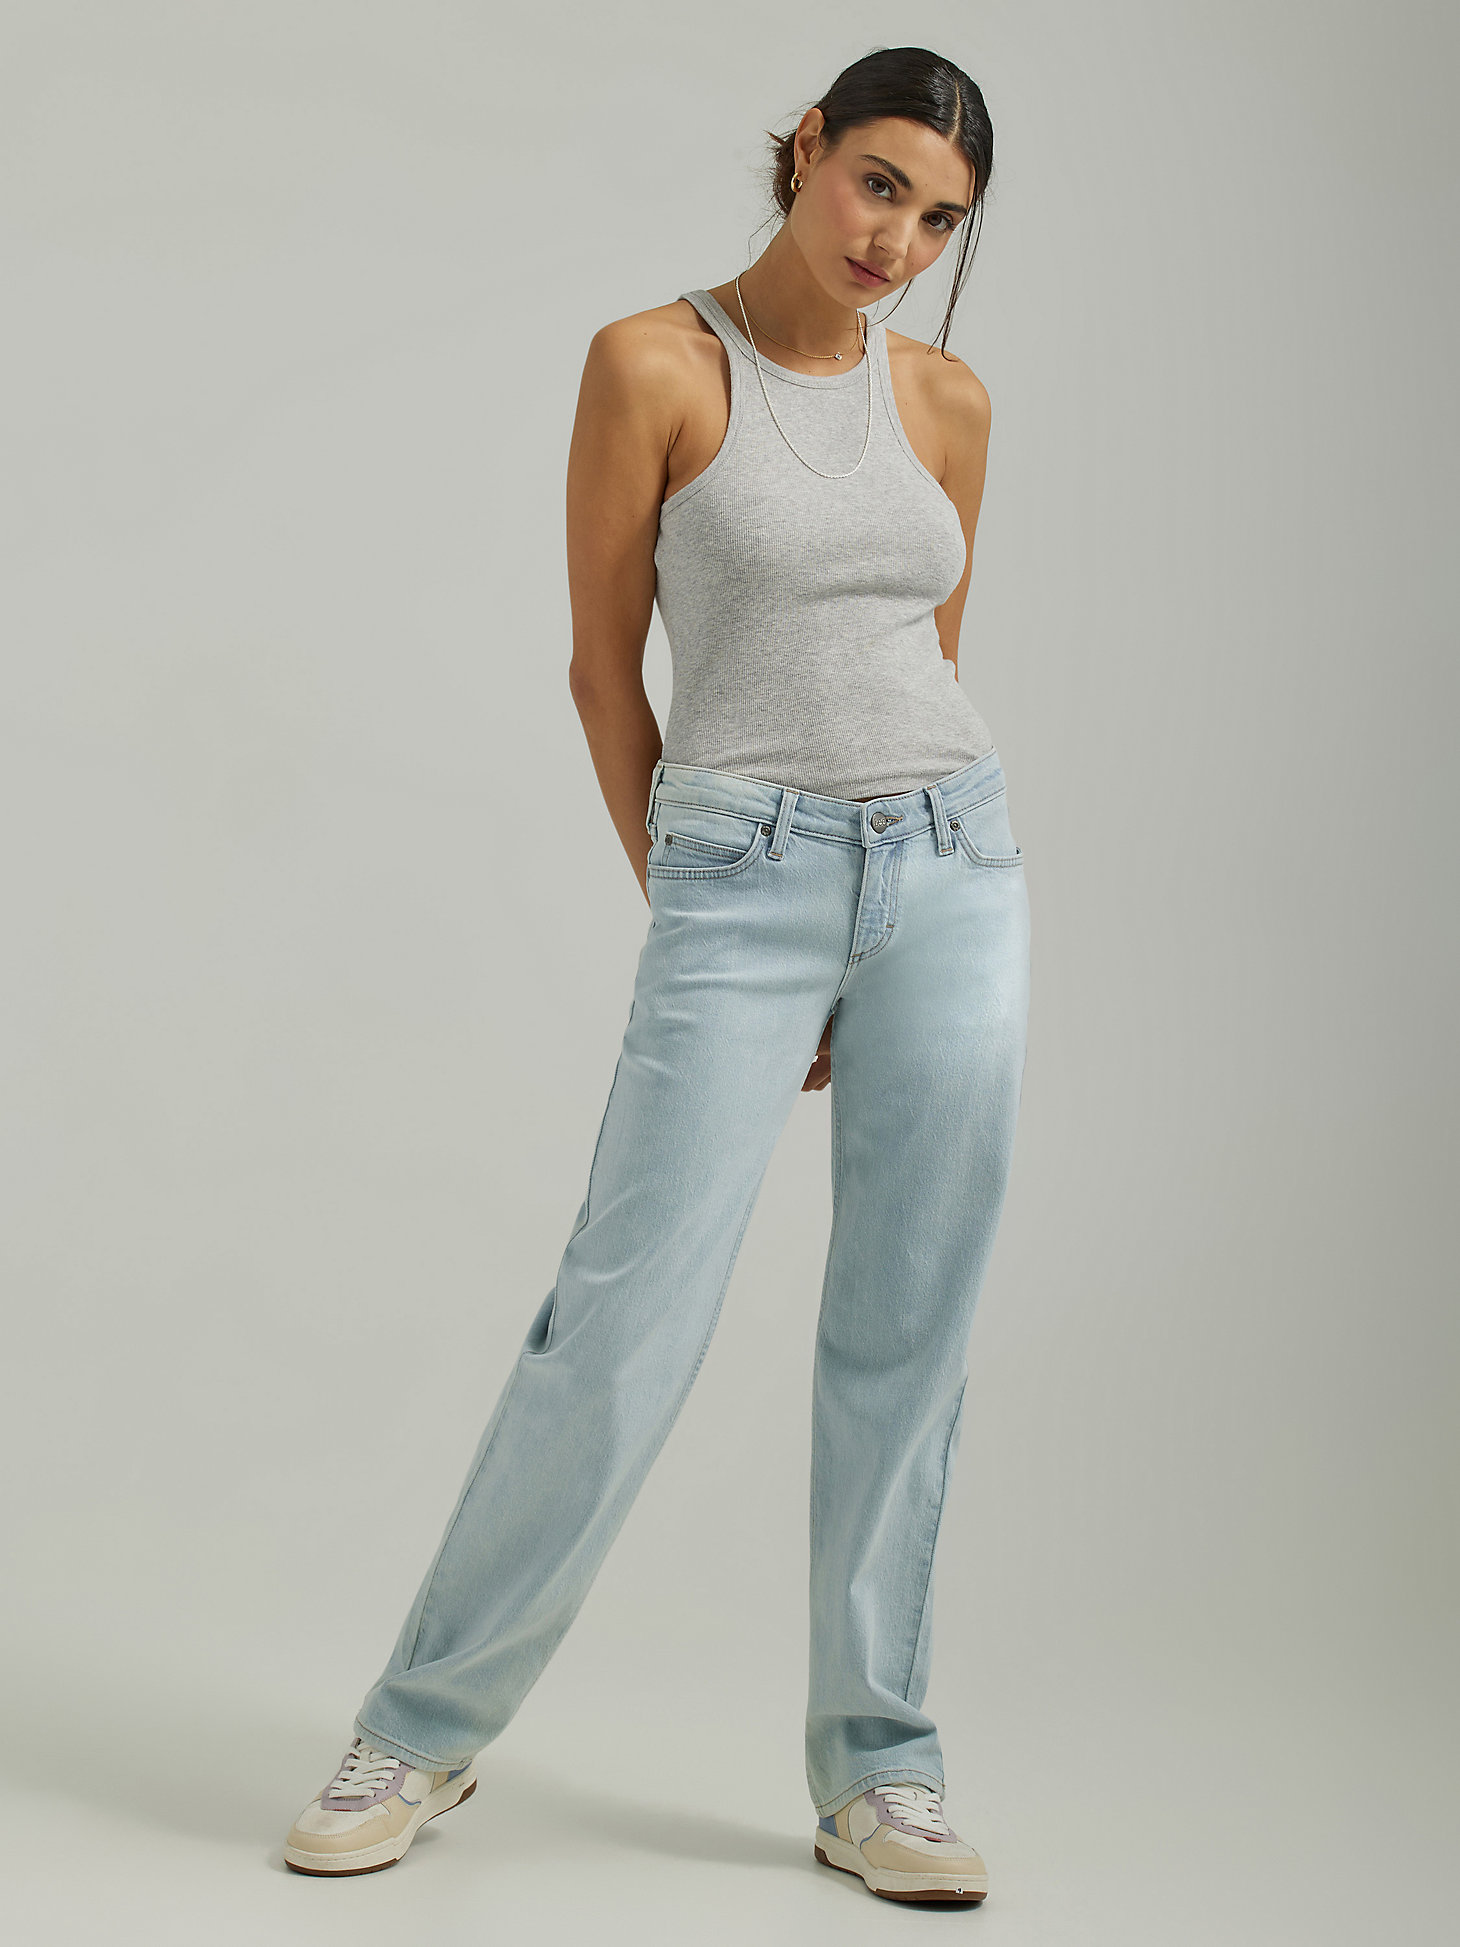 Women's Low Rise Straight Jean in Morning Walk main view